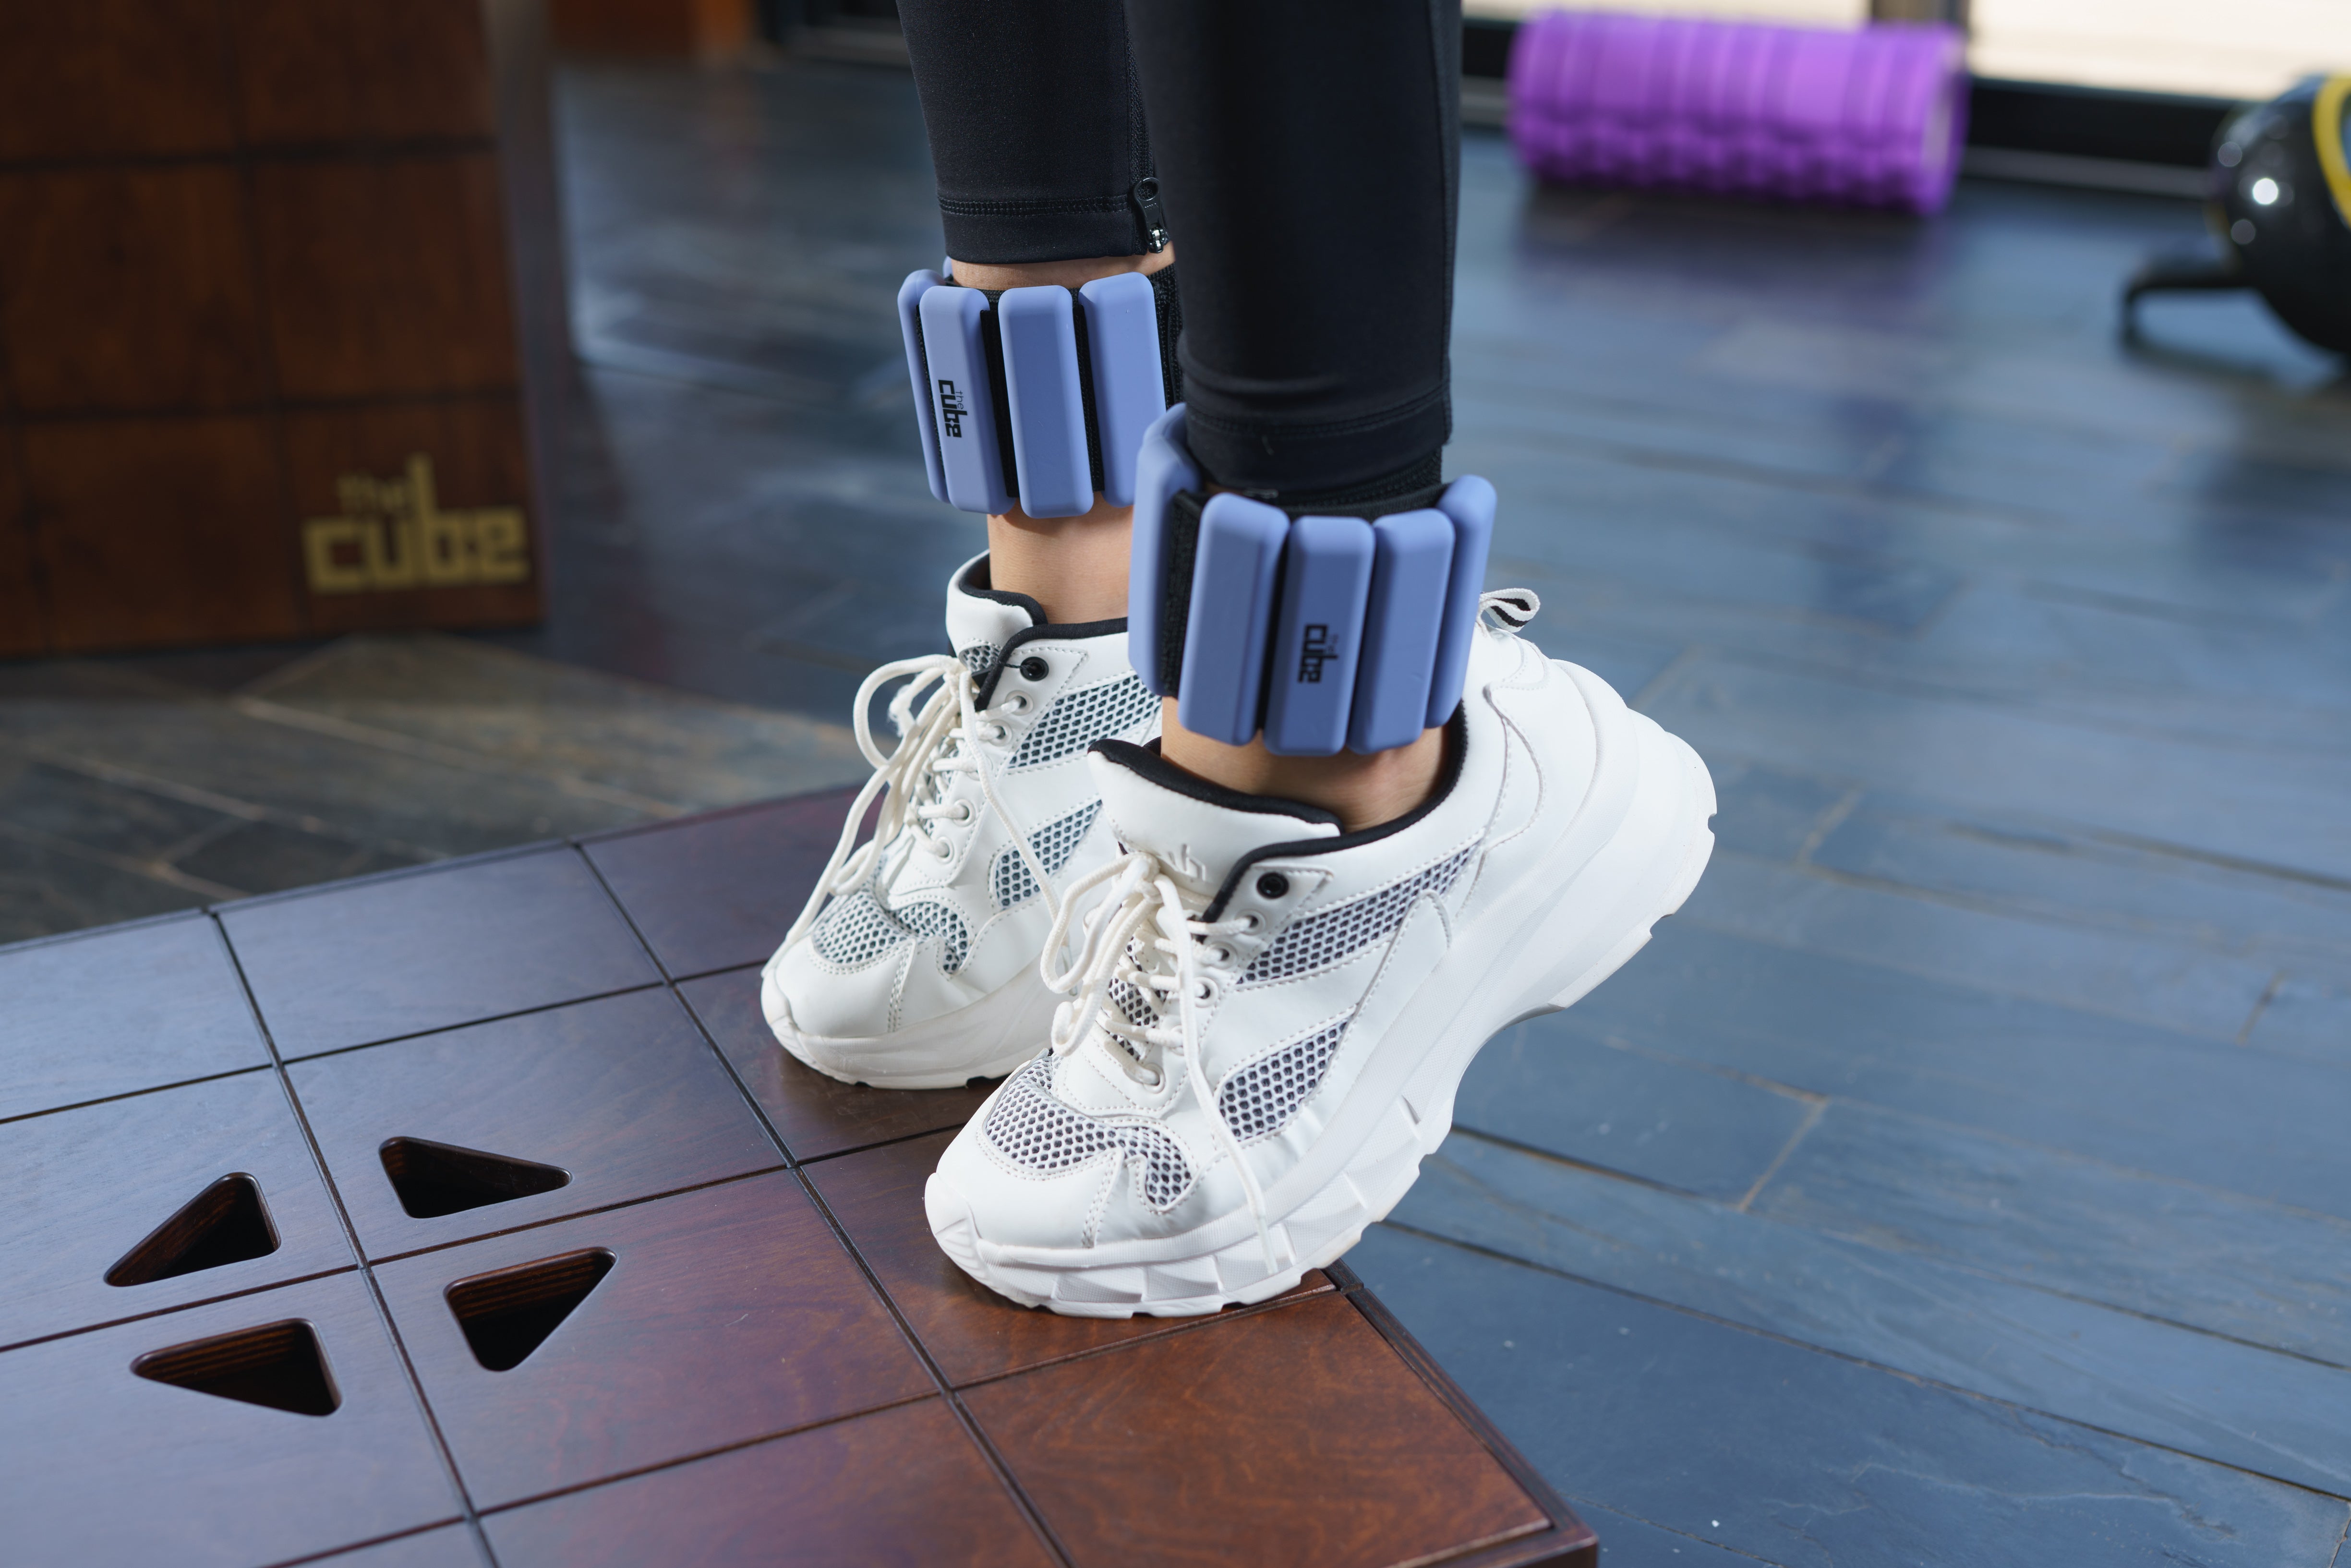 Ankle Weights In Your Workout Routine